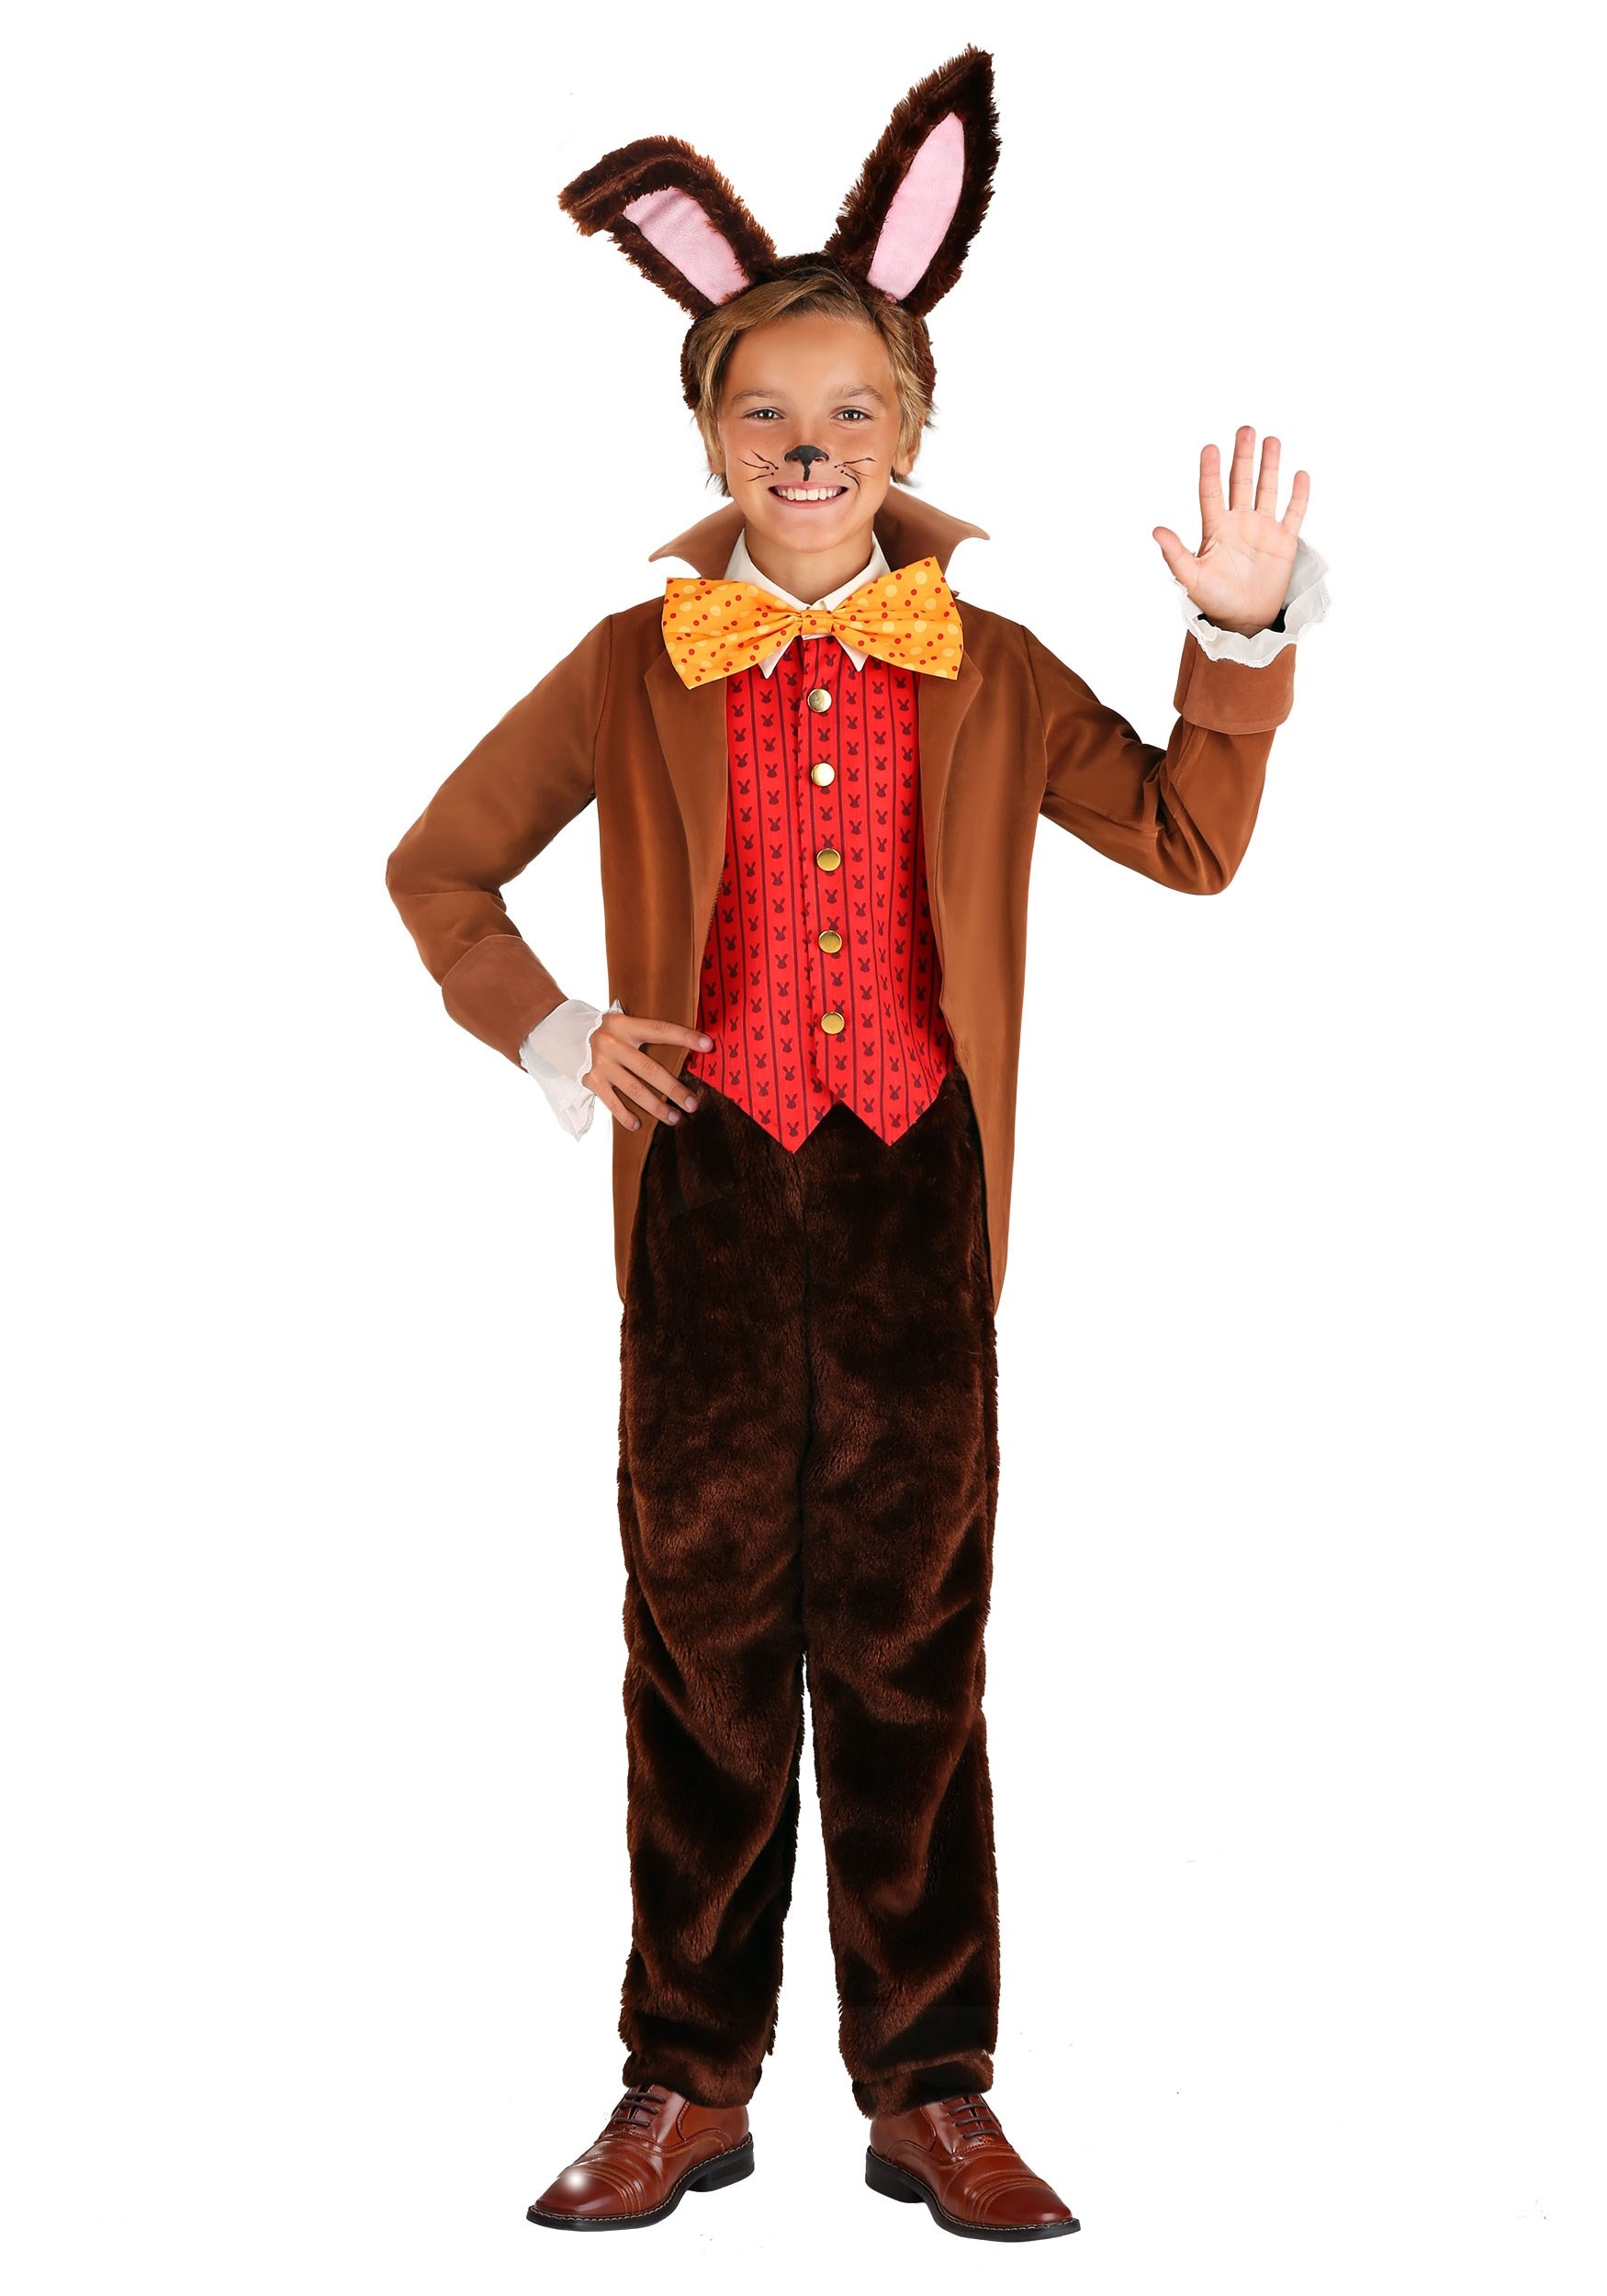 Photos - Fancy Dress March FUN Costumes Tea Time  Hare Kid's Costume Brown/Orange/Red FU 